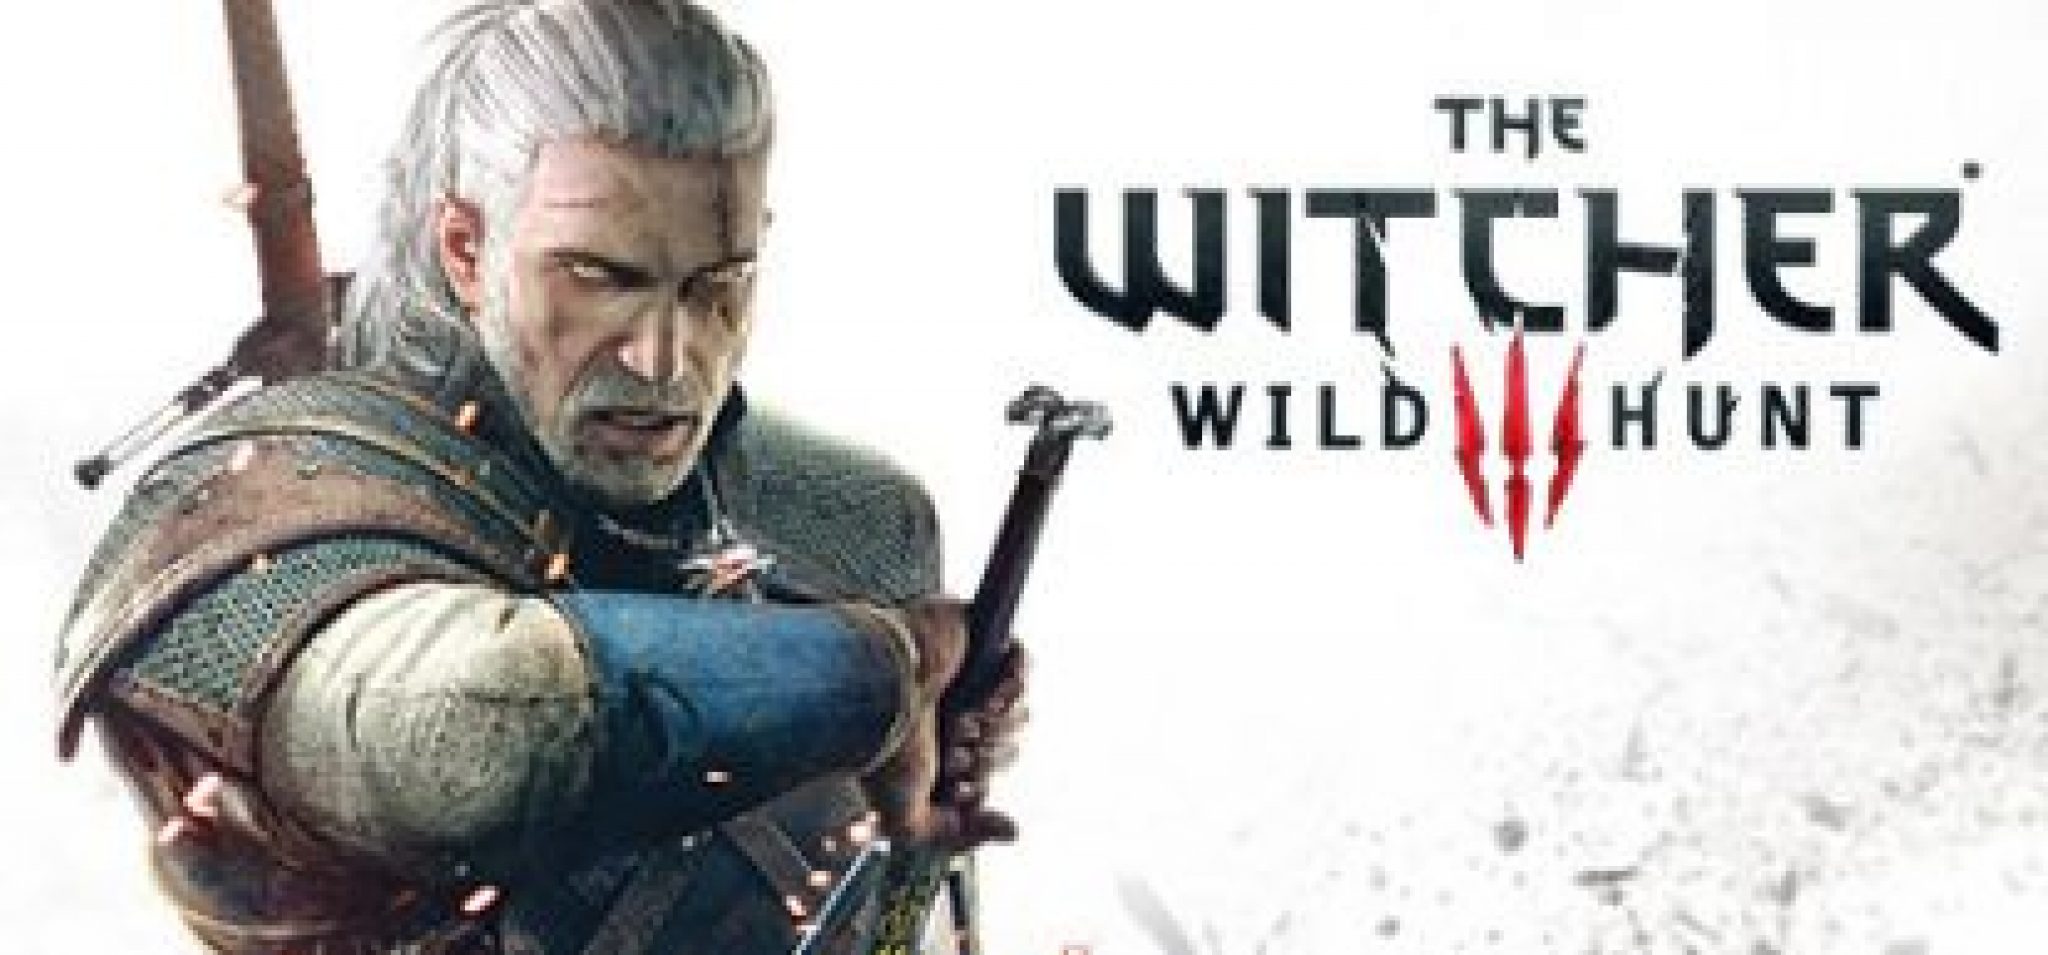 the witcher 3 wild hunt pc requirements